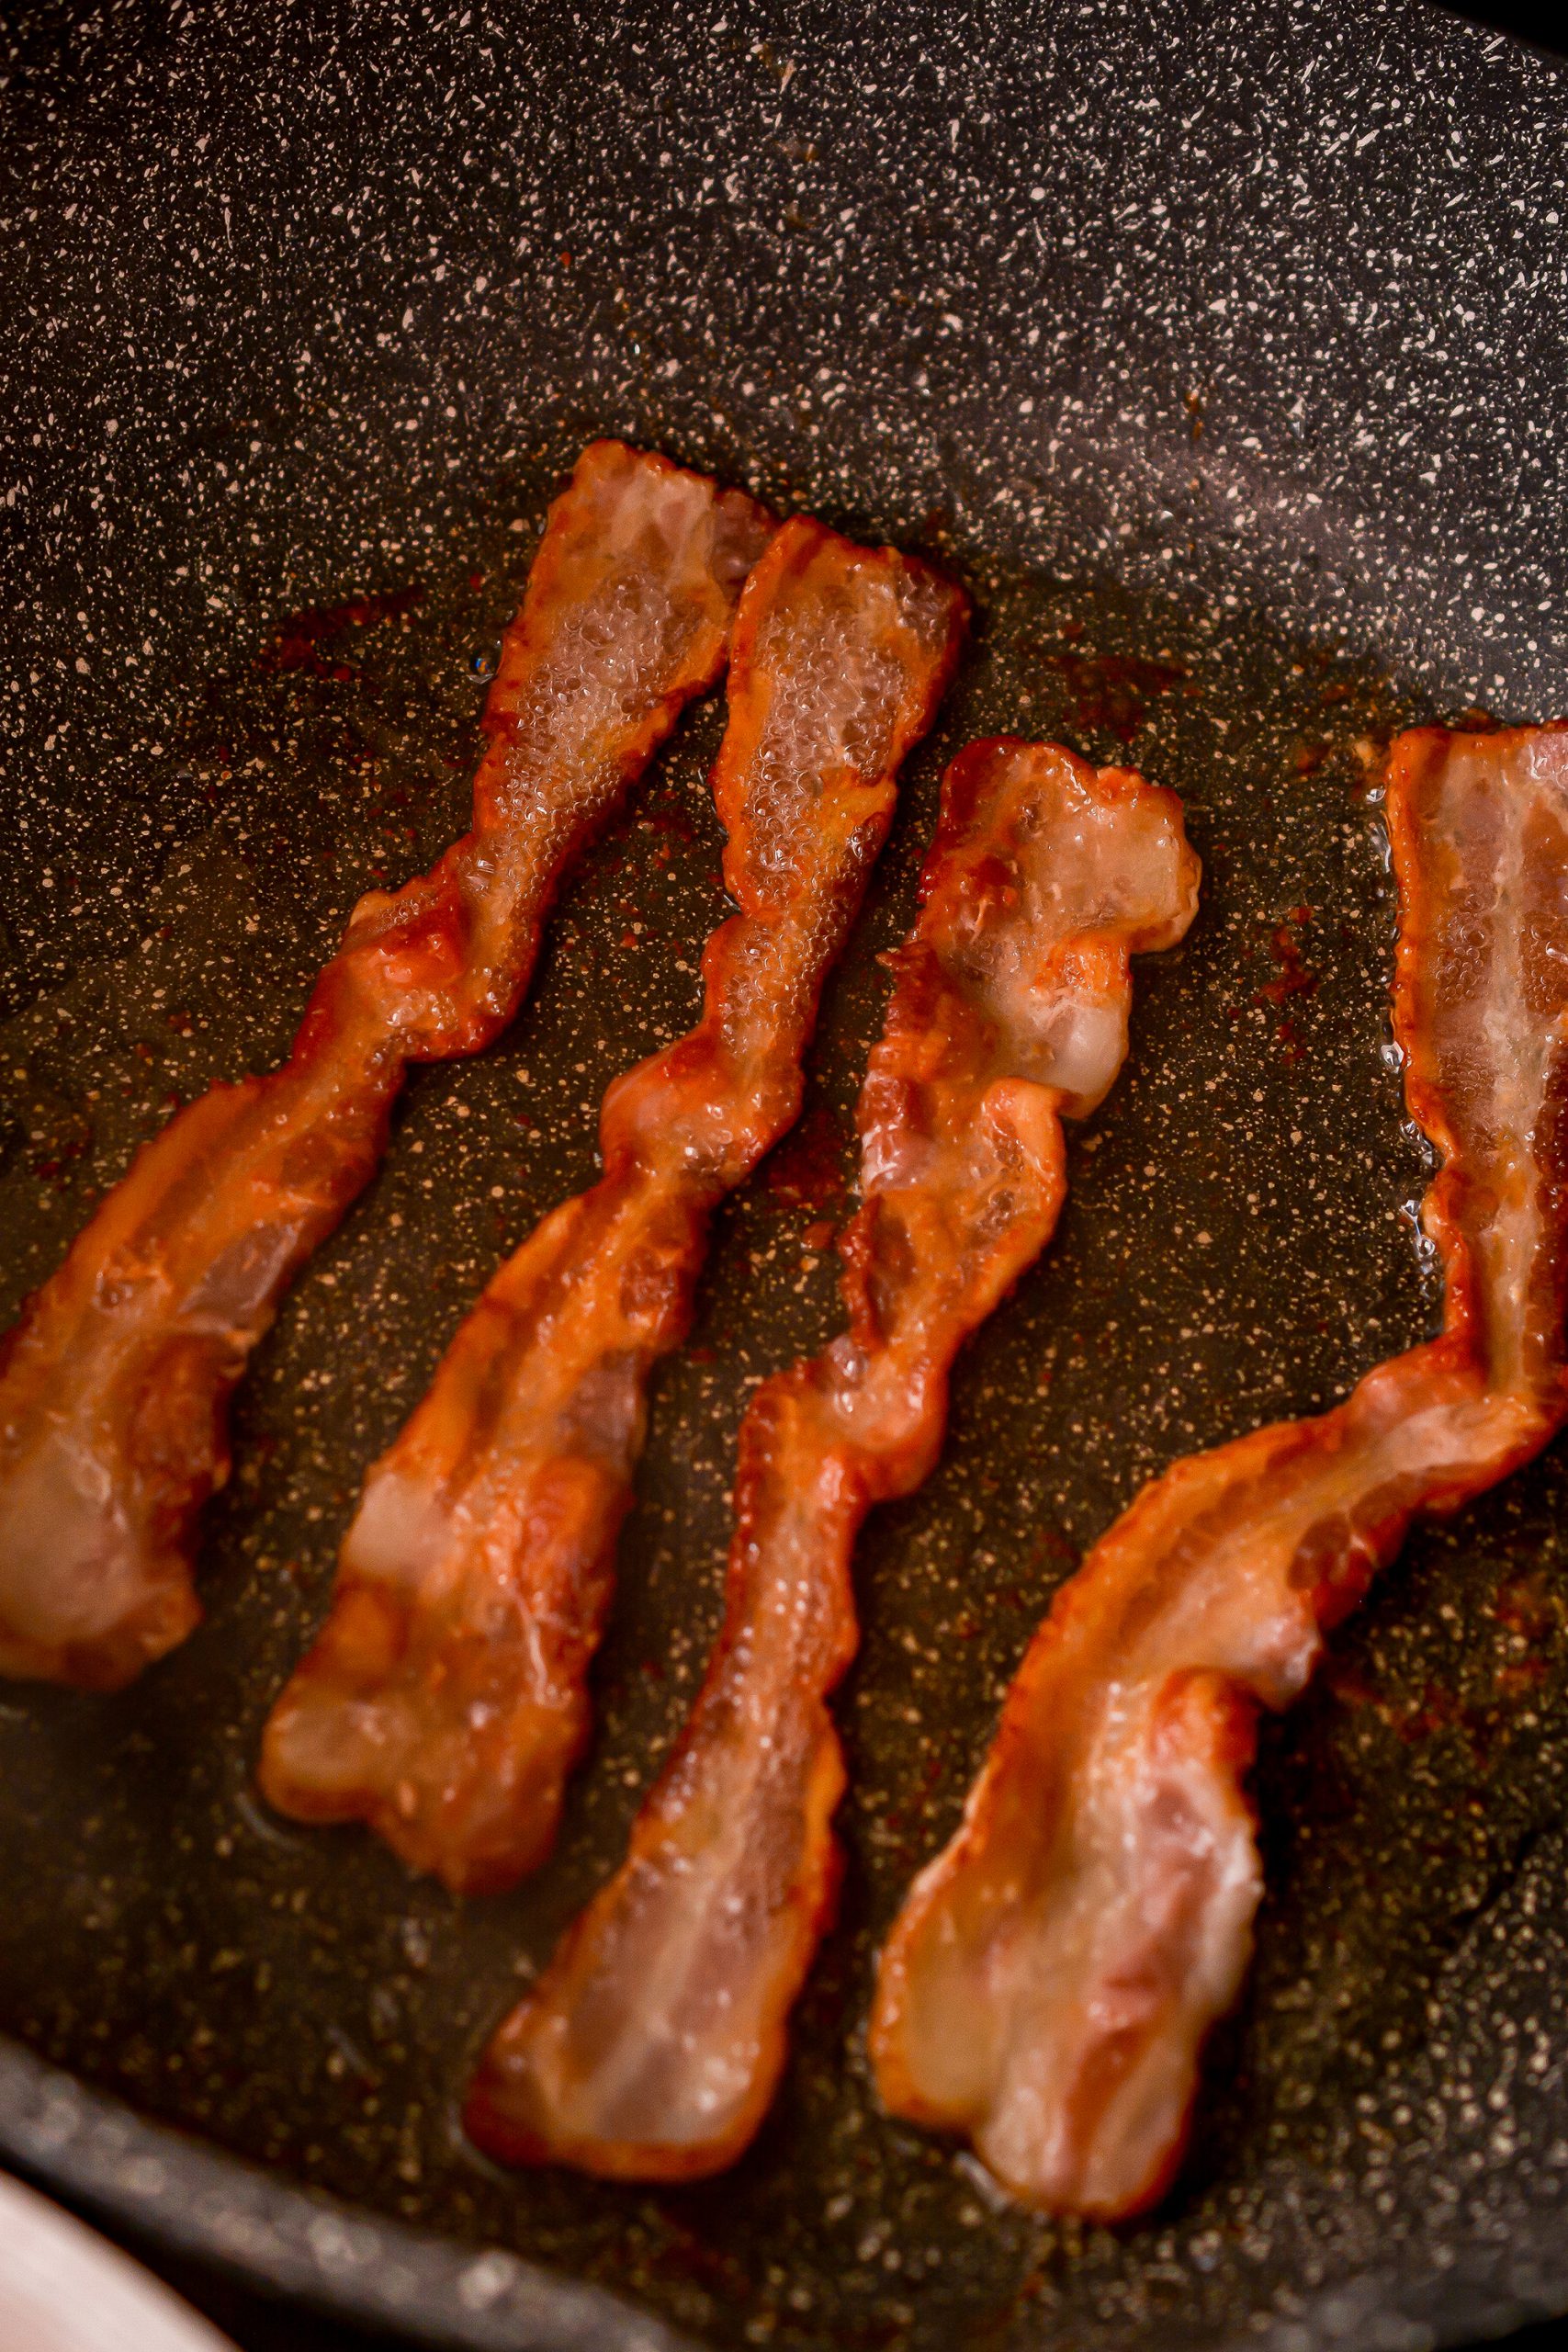 Cook the bacon until crispy and then drain on a paper towel-lined plate.